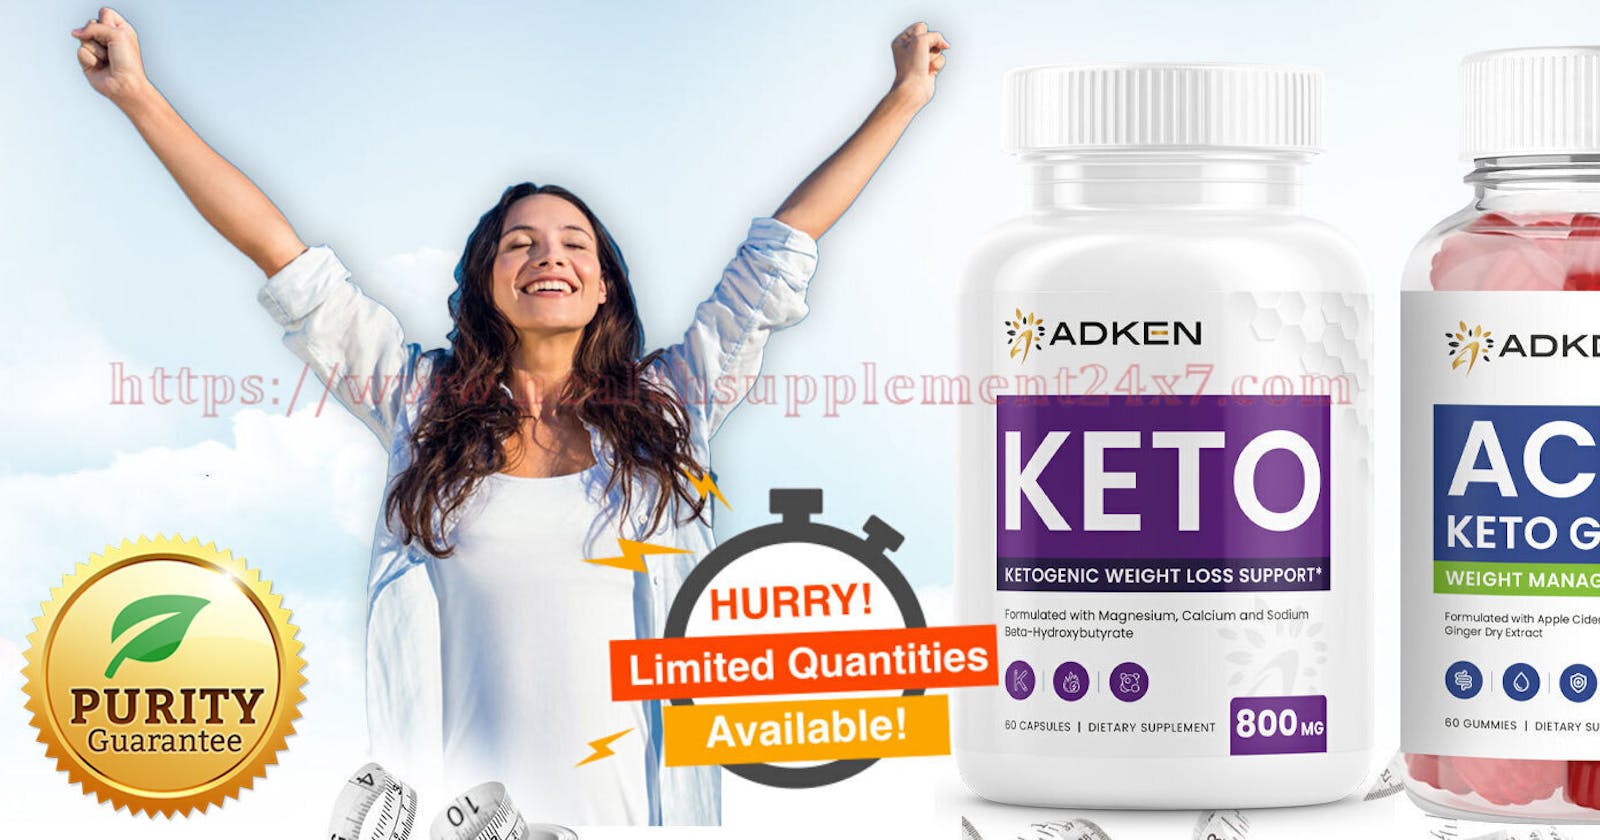 Adken Keto ACV Gummies Does It Really Work For Fat And Weight Loss Read Conclusion And Where To Buy?(Spam Or Legit)